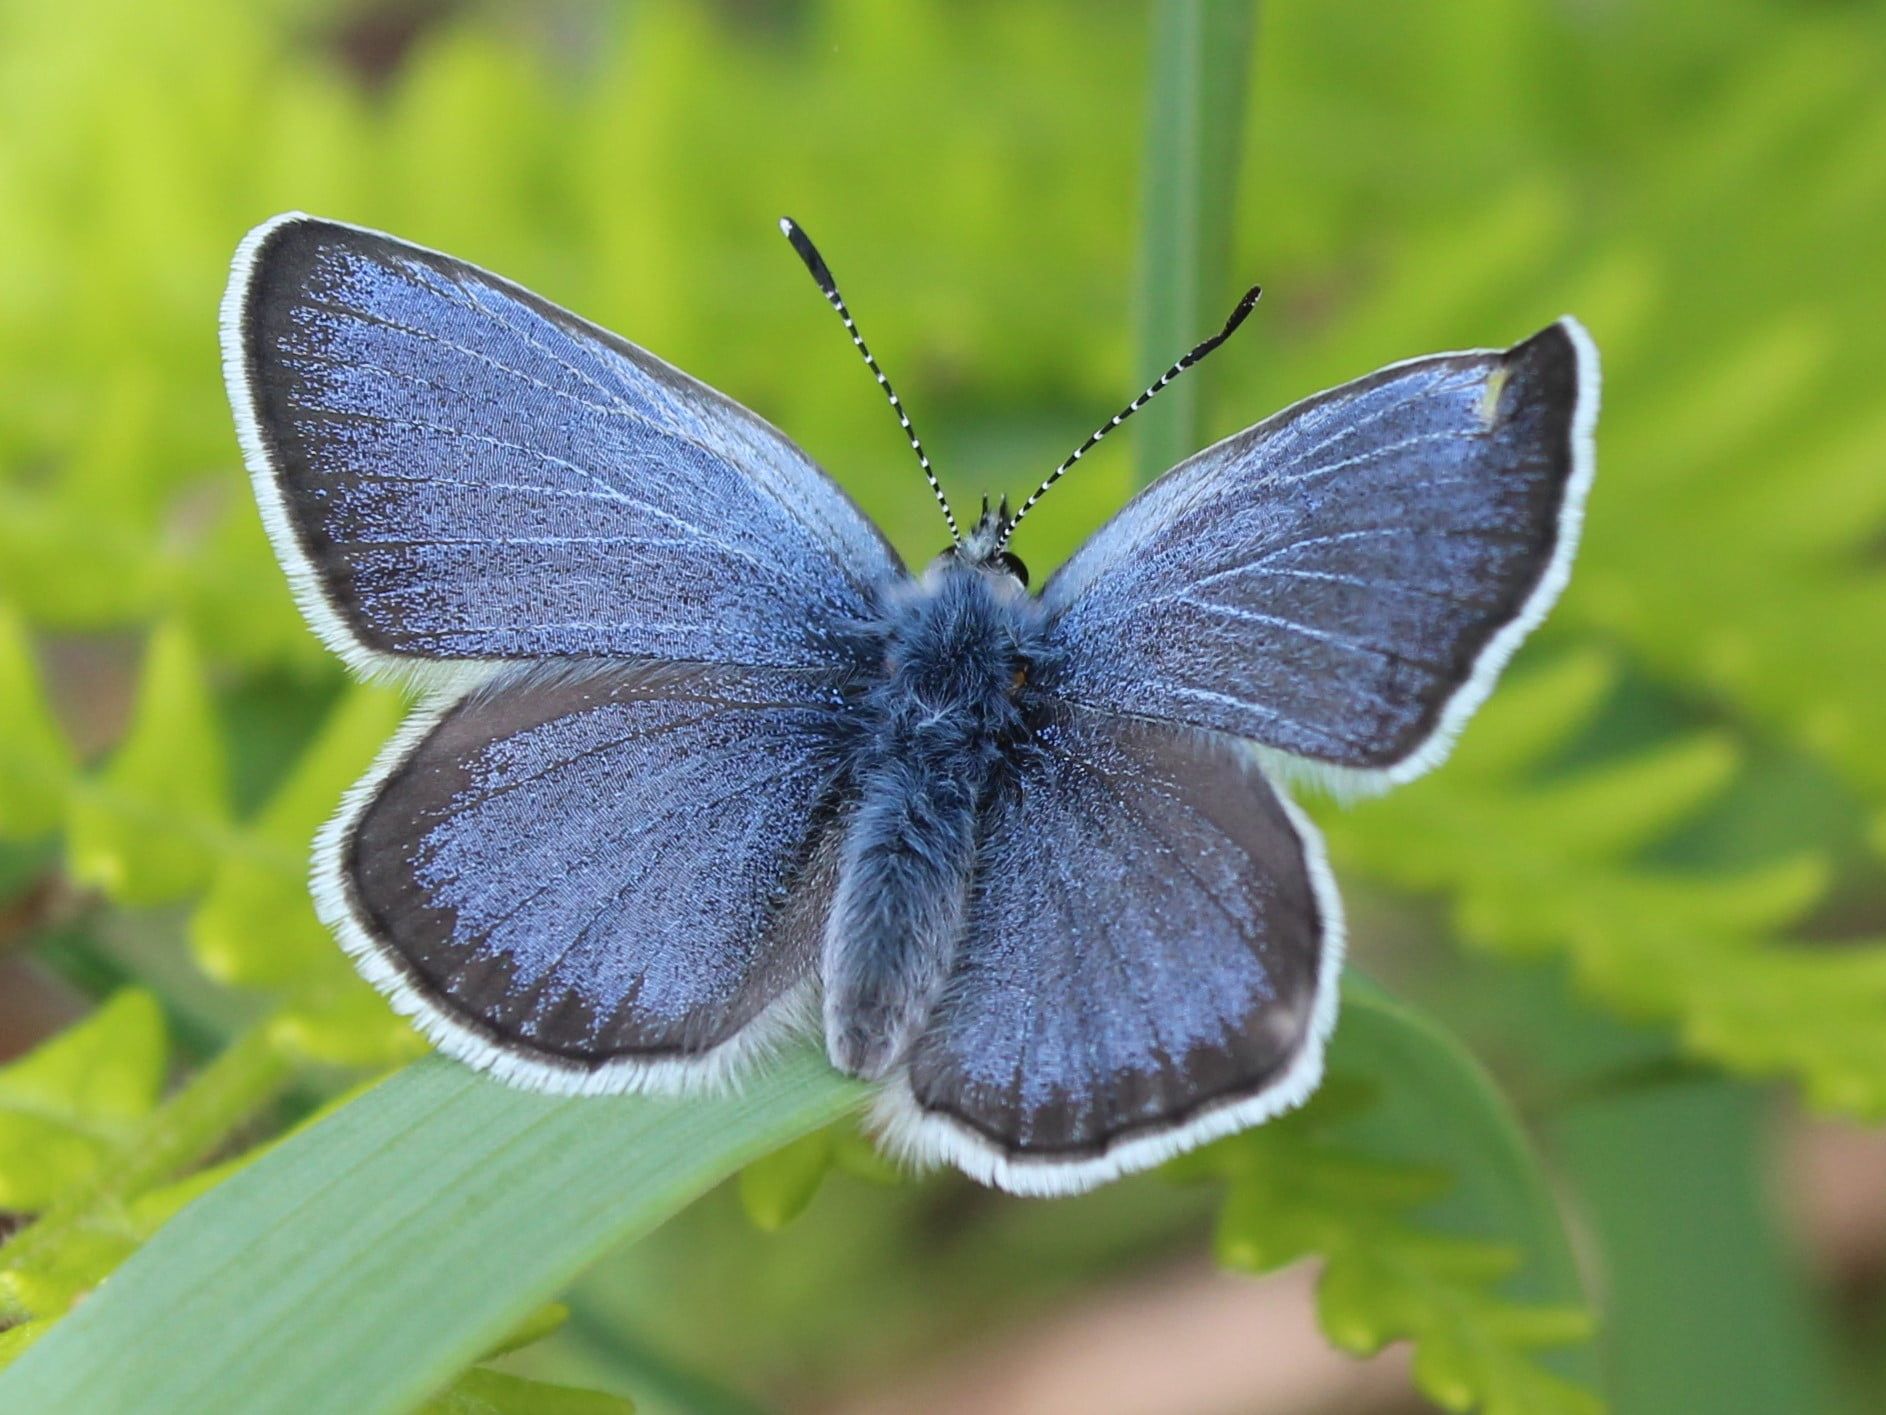 A blue butterfly resting on a green leaf